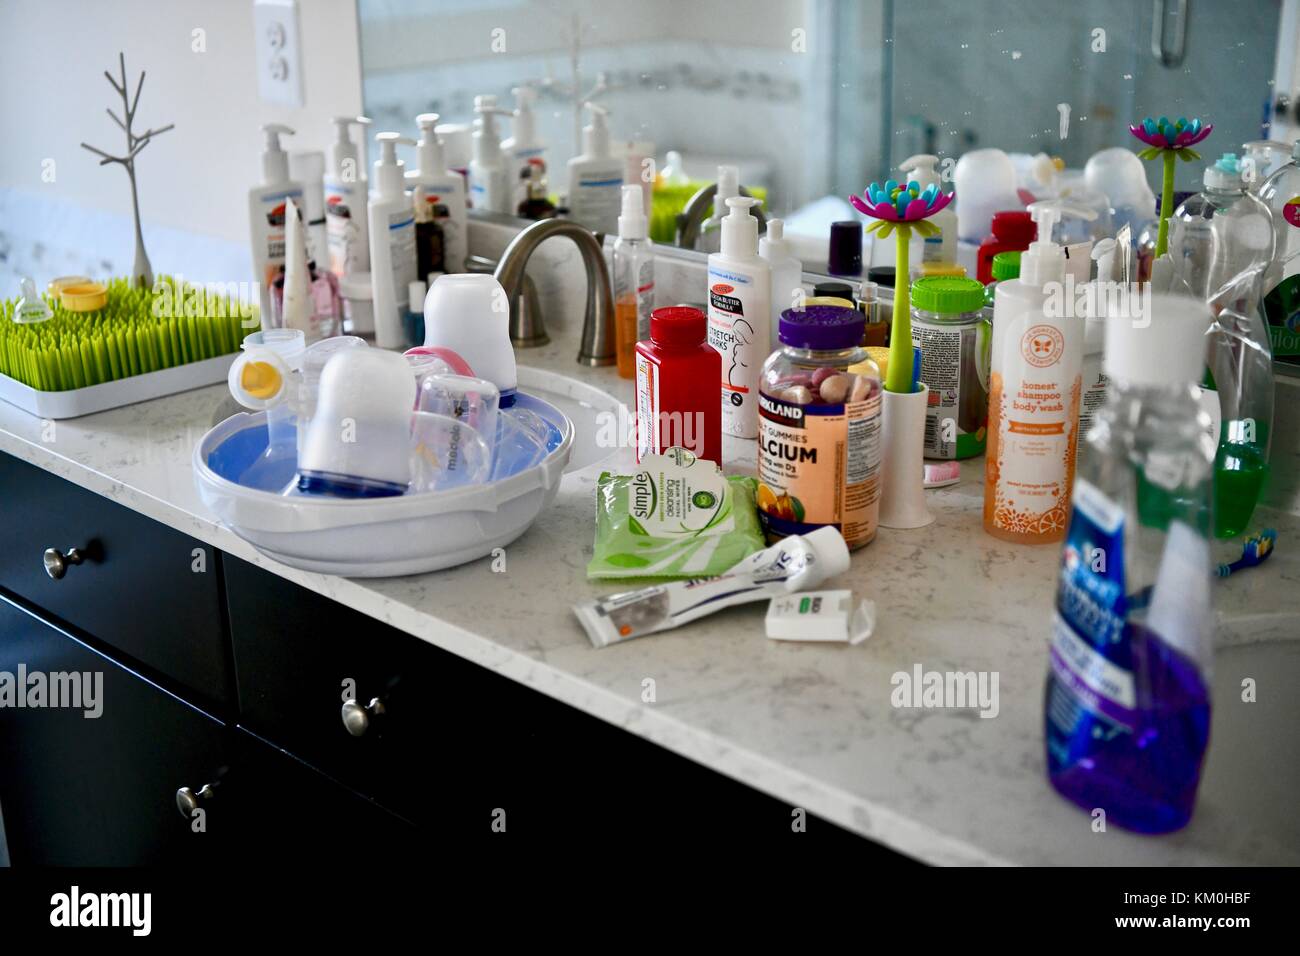 Bathroom counter covered in bathroom products and supplies Stock Photo